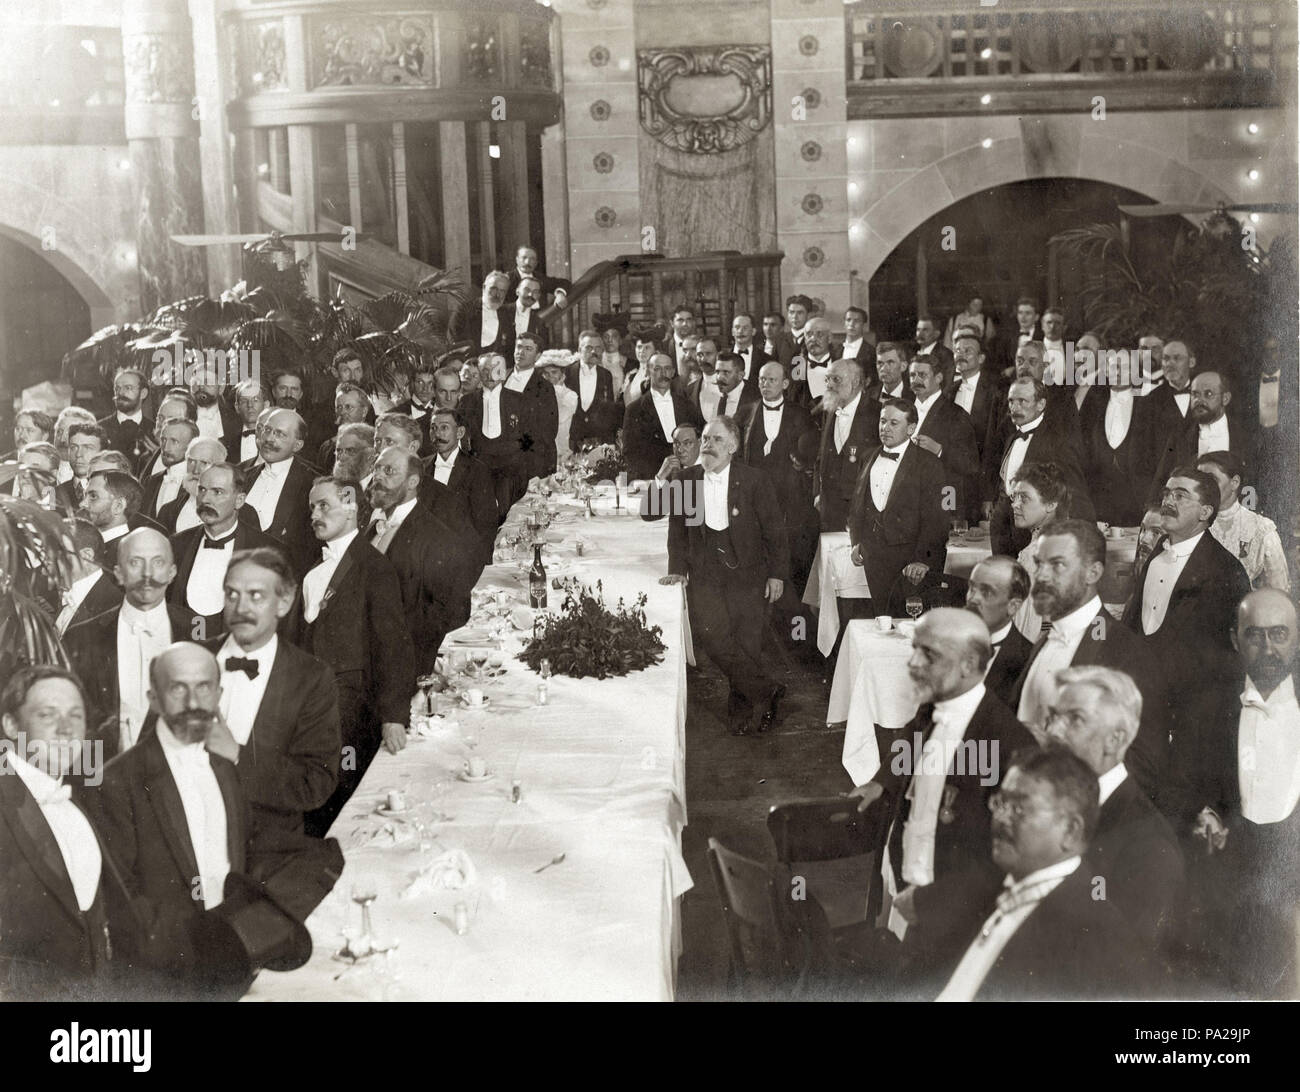 180 Banquet for scientists in the Tyrolean Alps at the 1904 World's Fair, 22 September 1904. (View of banqueters standing, most looking to the left) Stock Photo